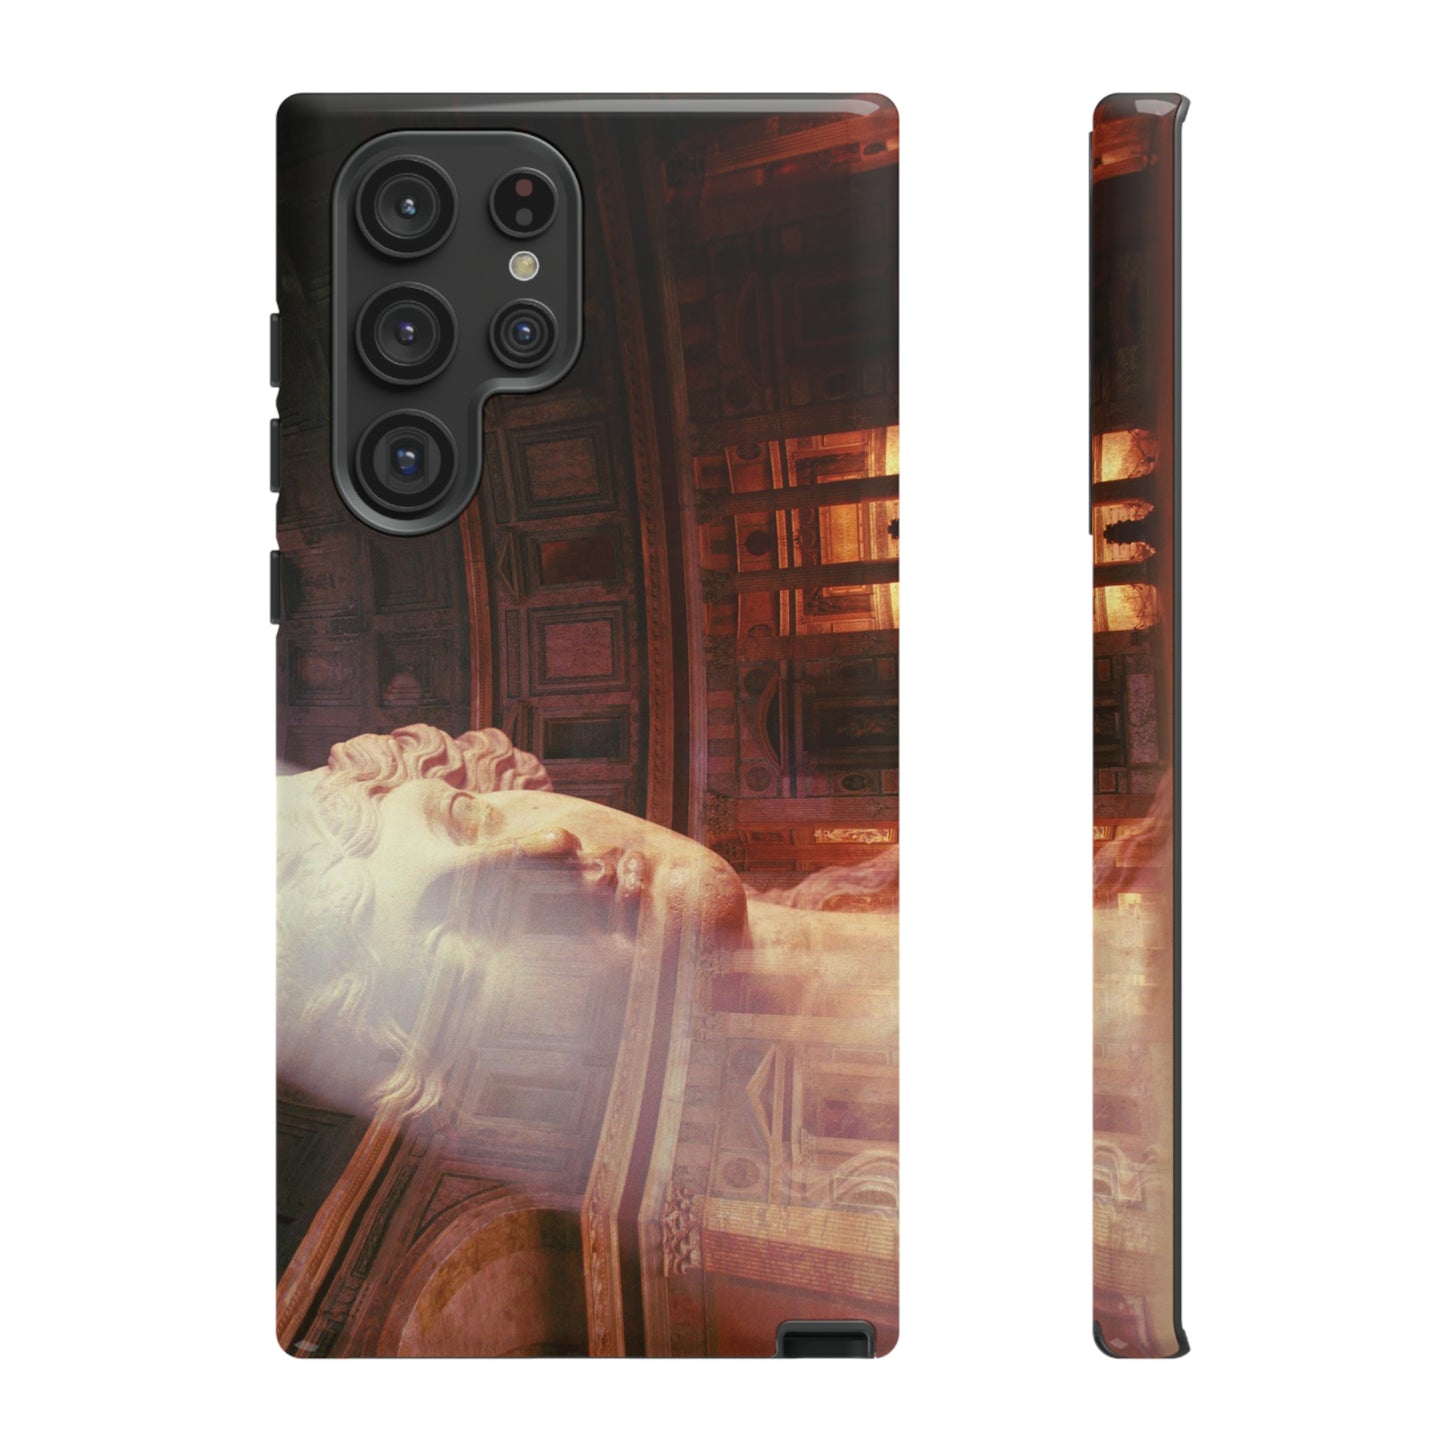 The Pantheon Phone Cases